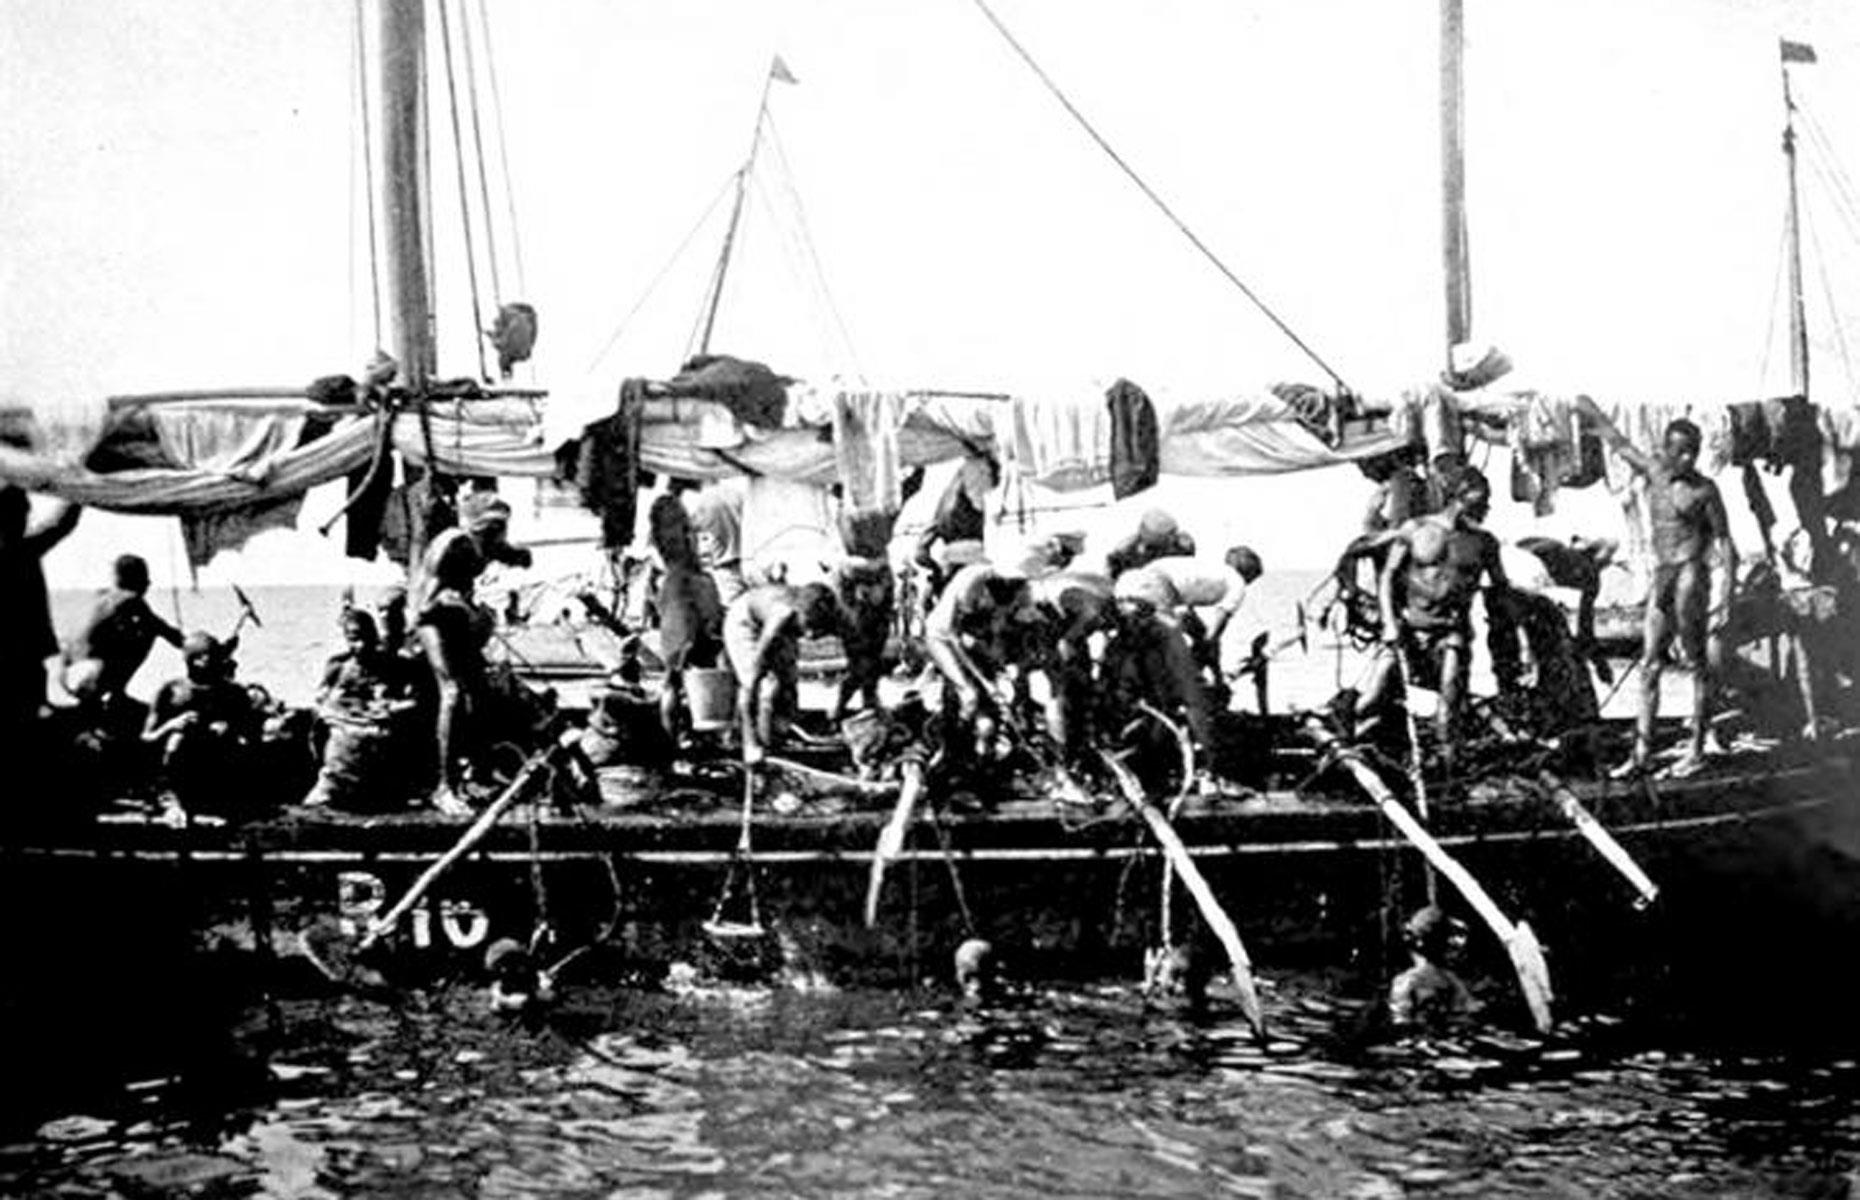 <p>Like Saudi Arabia, Qatar was an impoverished country during the early part of the 20th century. The Gulf state, which became a British protectorate in 1916, was reliant on fishing and pearl diving (pictured), and most Qataris had to work long and hard to make a decent living.</p>  <p>Oil was discovered in 1940, but World War II put a halt to further exploration, and it wasn't until 1949 that Qatar began producing the black stuff in earnest. Flush with oil money, the Middle Eastern country modernised at breakneck speed during the 1950s and 1960s. </p>